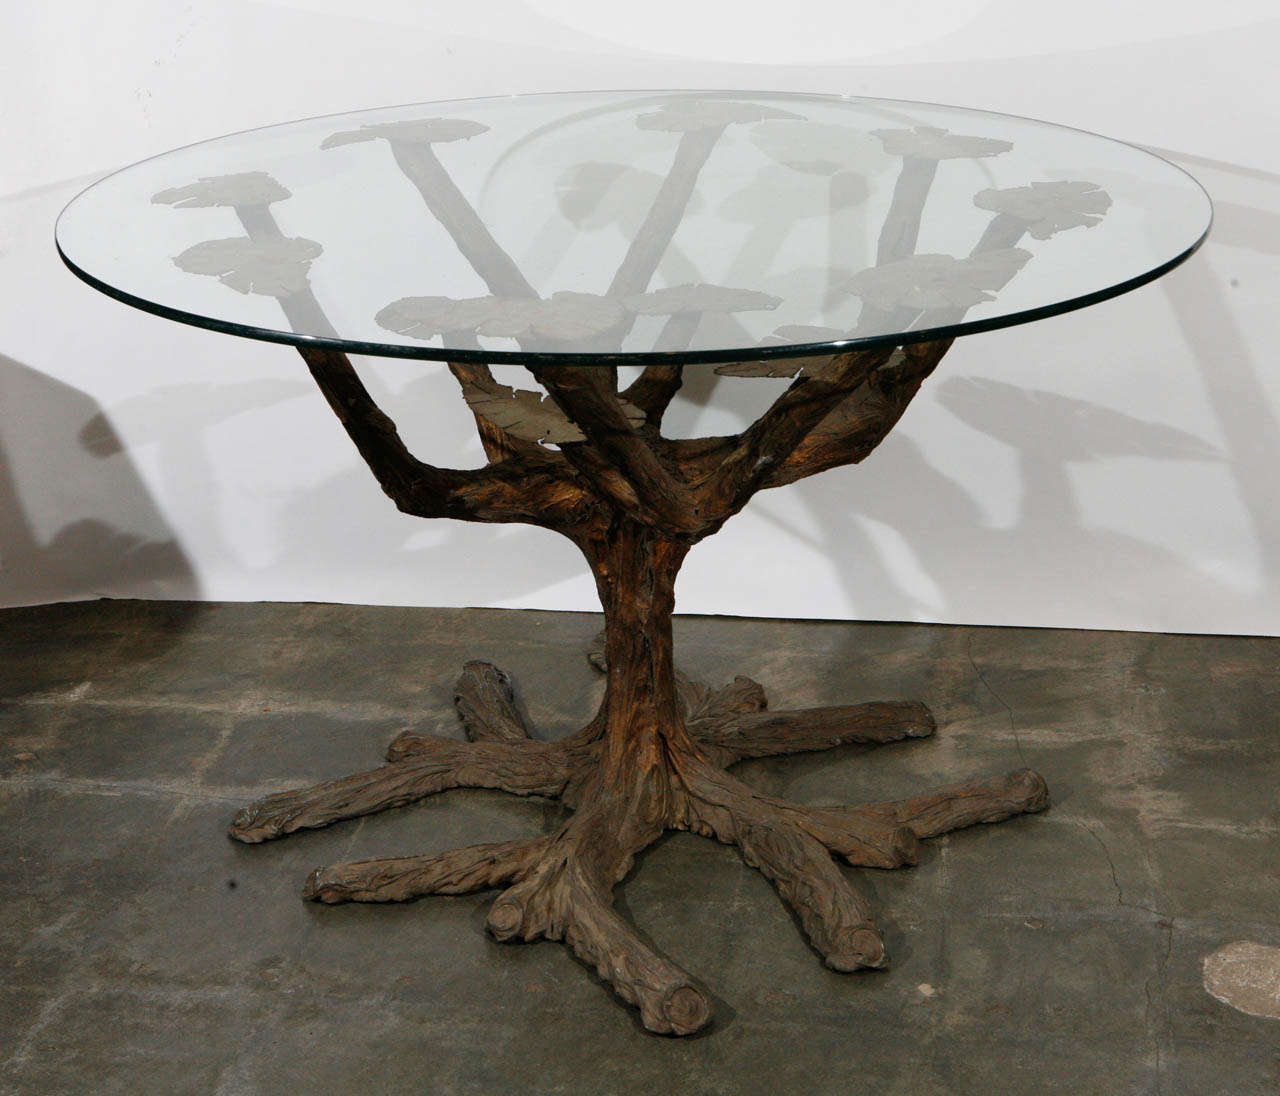 This table base has a very interesting modernist look.   The base is certainly custom made. The basic structure is metal over cement and rebar with a "bark" skin applied by hand. There are surface cracks in the "bark" but are not